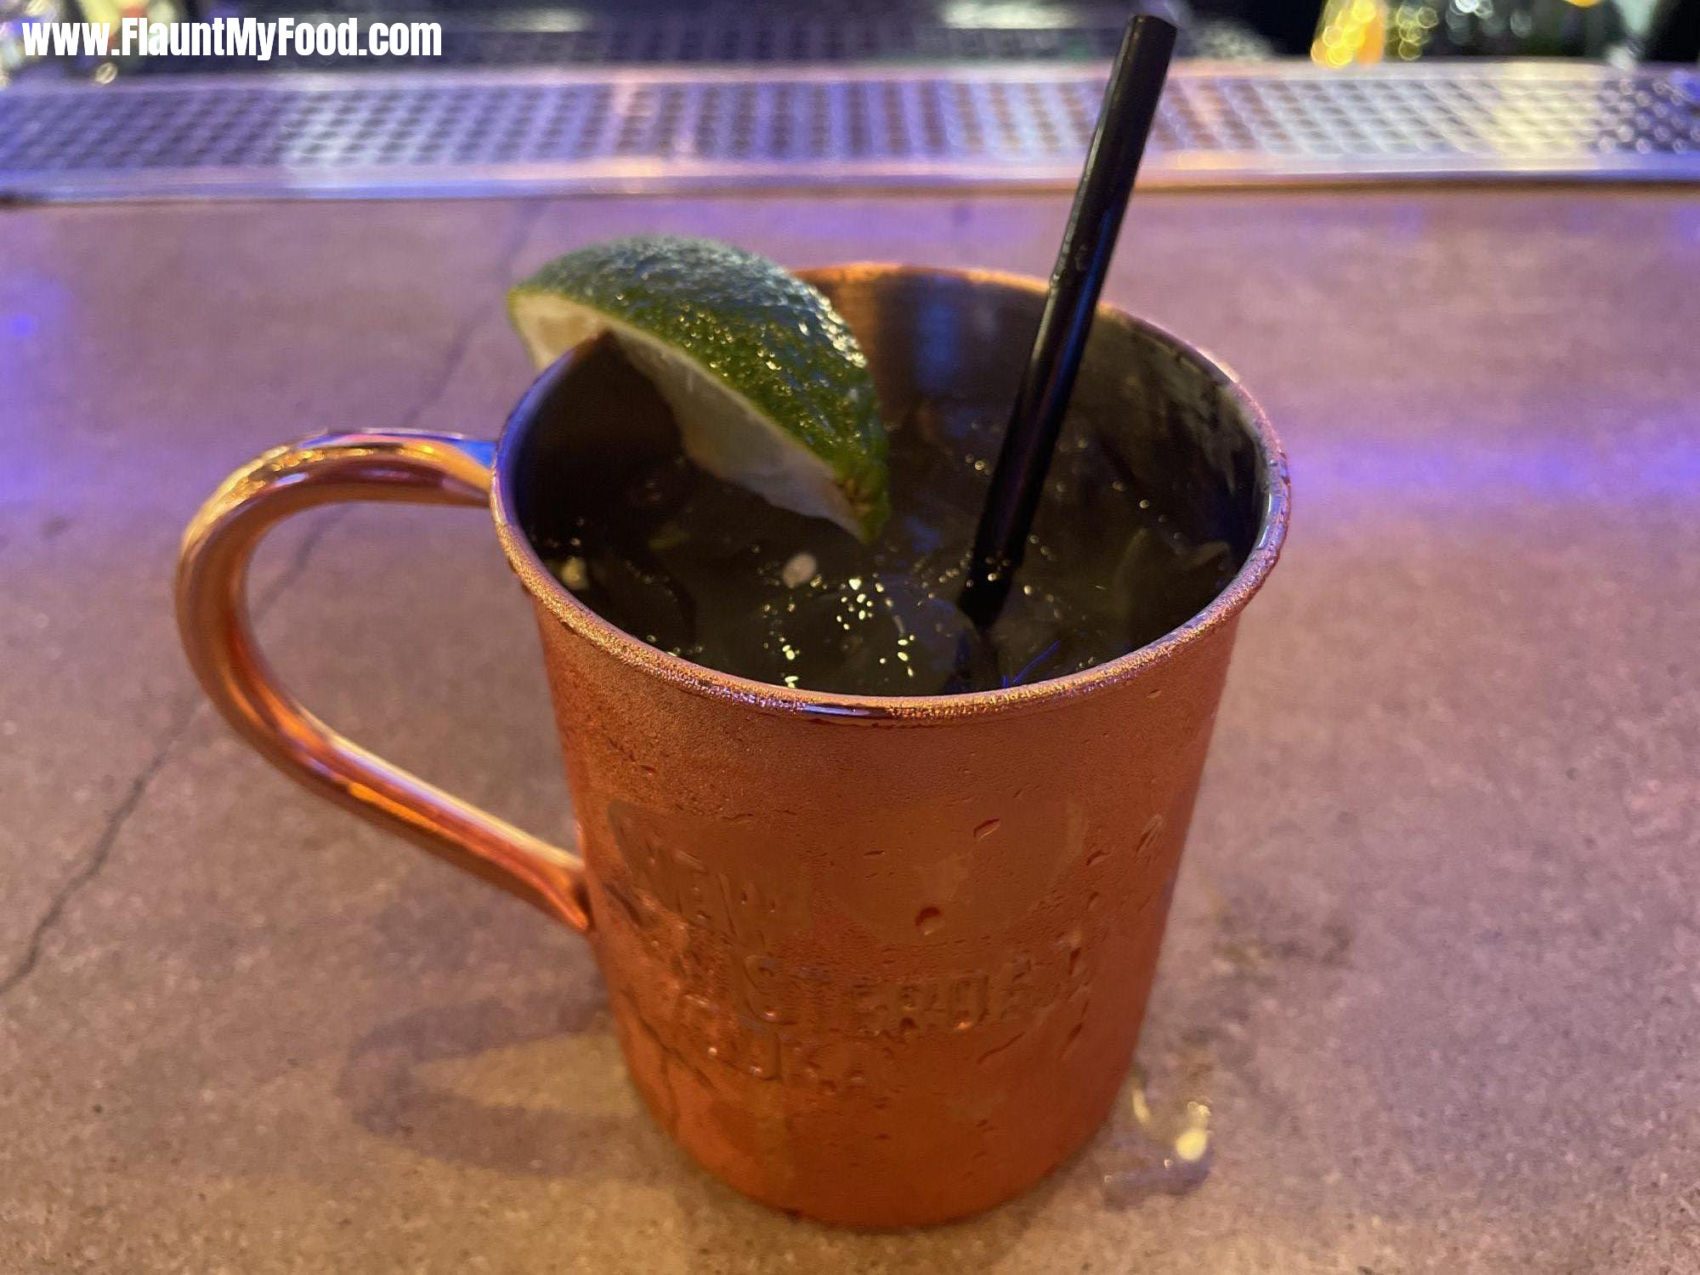 Mexican mule at the concrete cowboy off of W. 7th St. in Fort Worth TexasMexican mule at the concrete cowboy off of W. 7th St. in Fort Worth Texas. This drink is exactly like a Moscow Mule but with a Mexican meal typically you might use a Mexican liquor and also they add diced jalapeños to the drink which gives it a nice spicy taste and flavor.